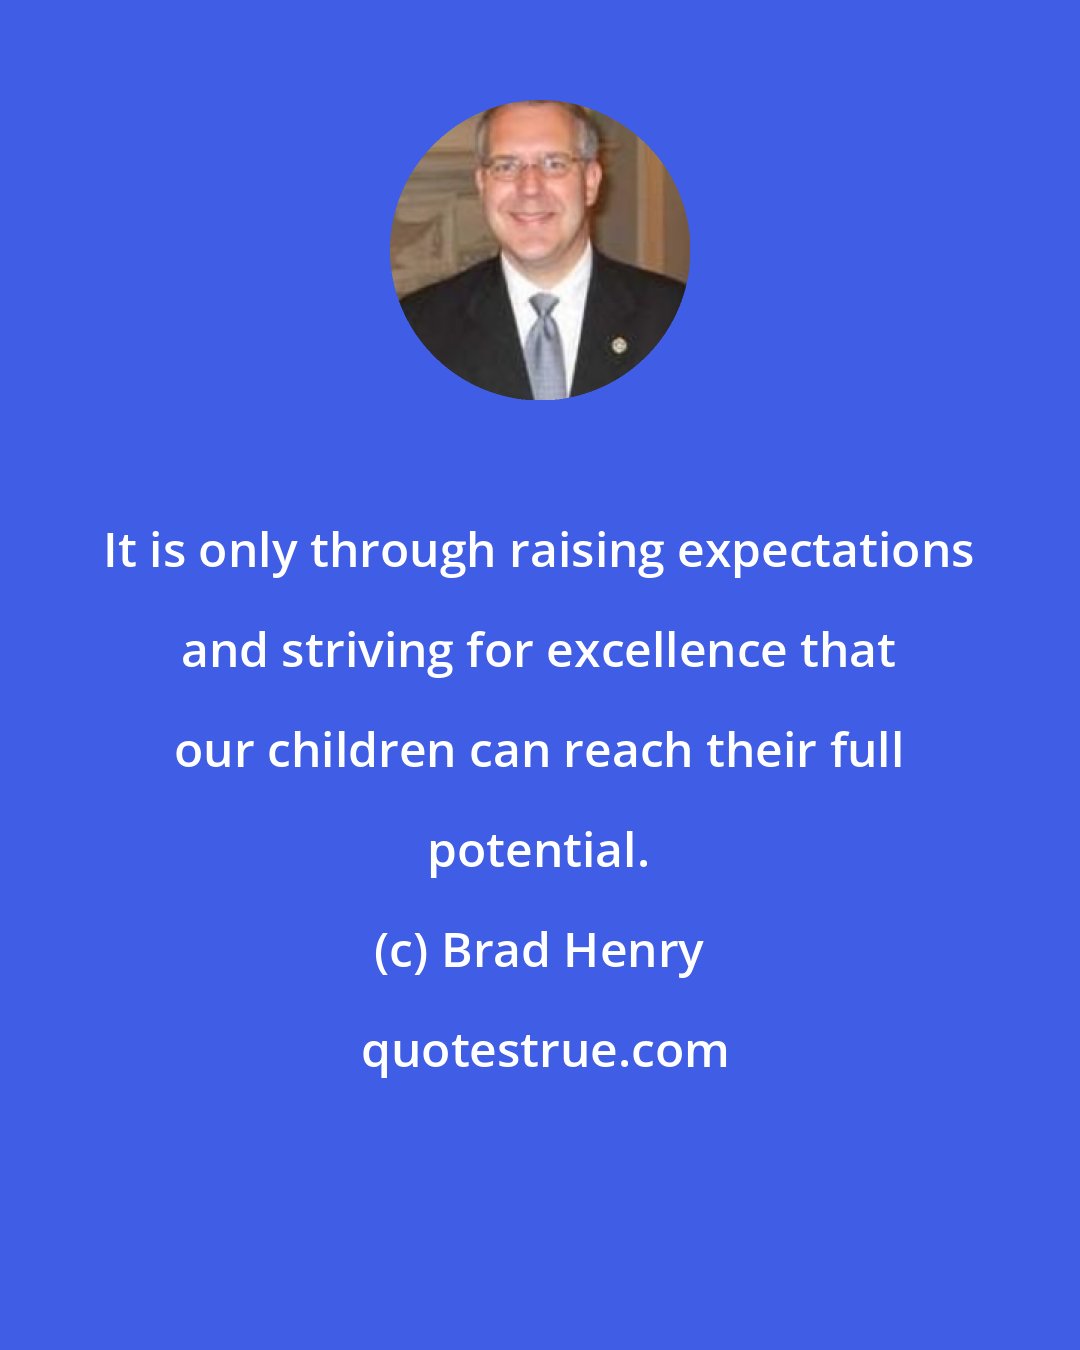 Brad Henry: It is only through raising expectations and striving for excellence that our children can reach their full potential.